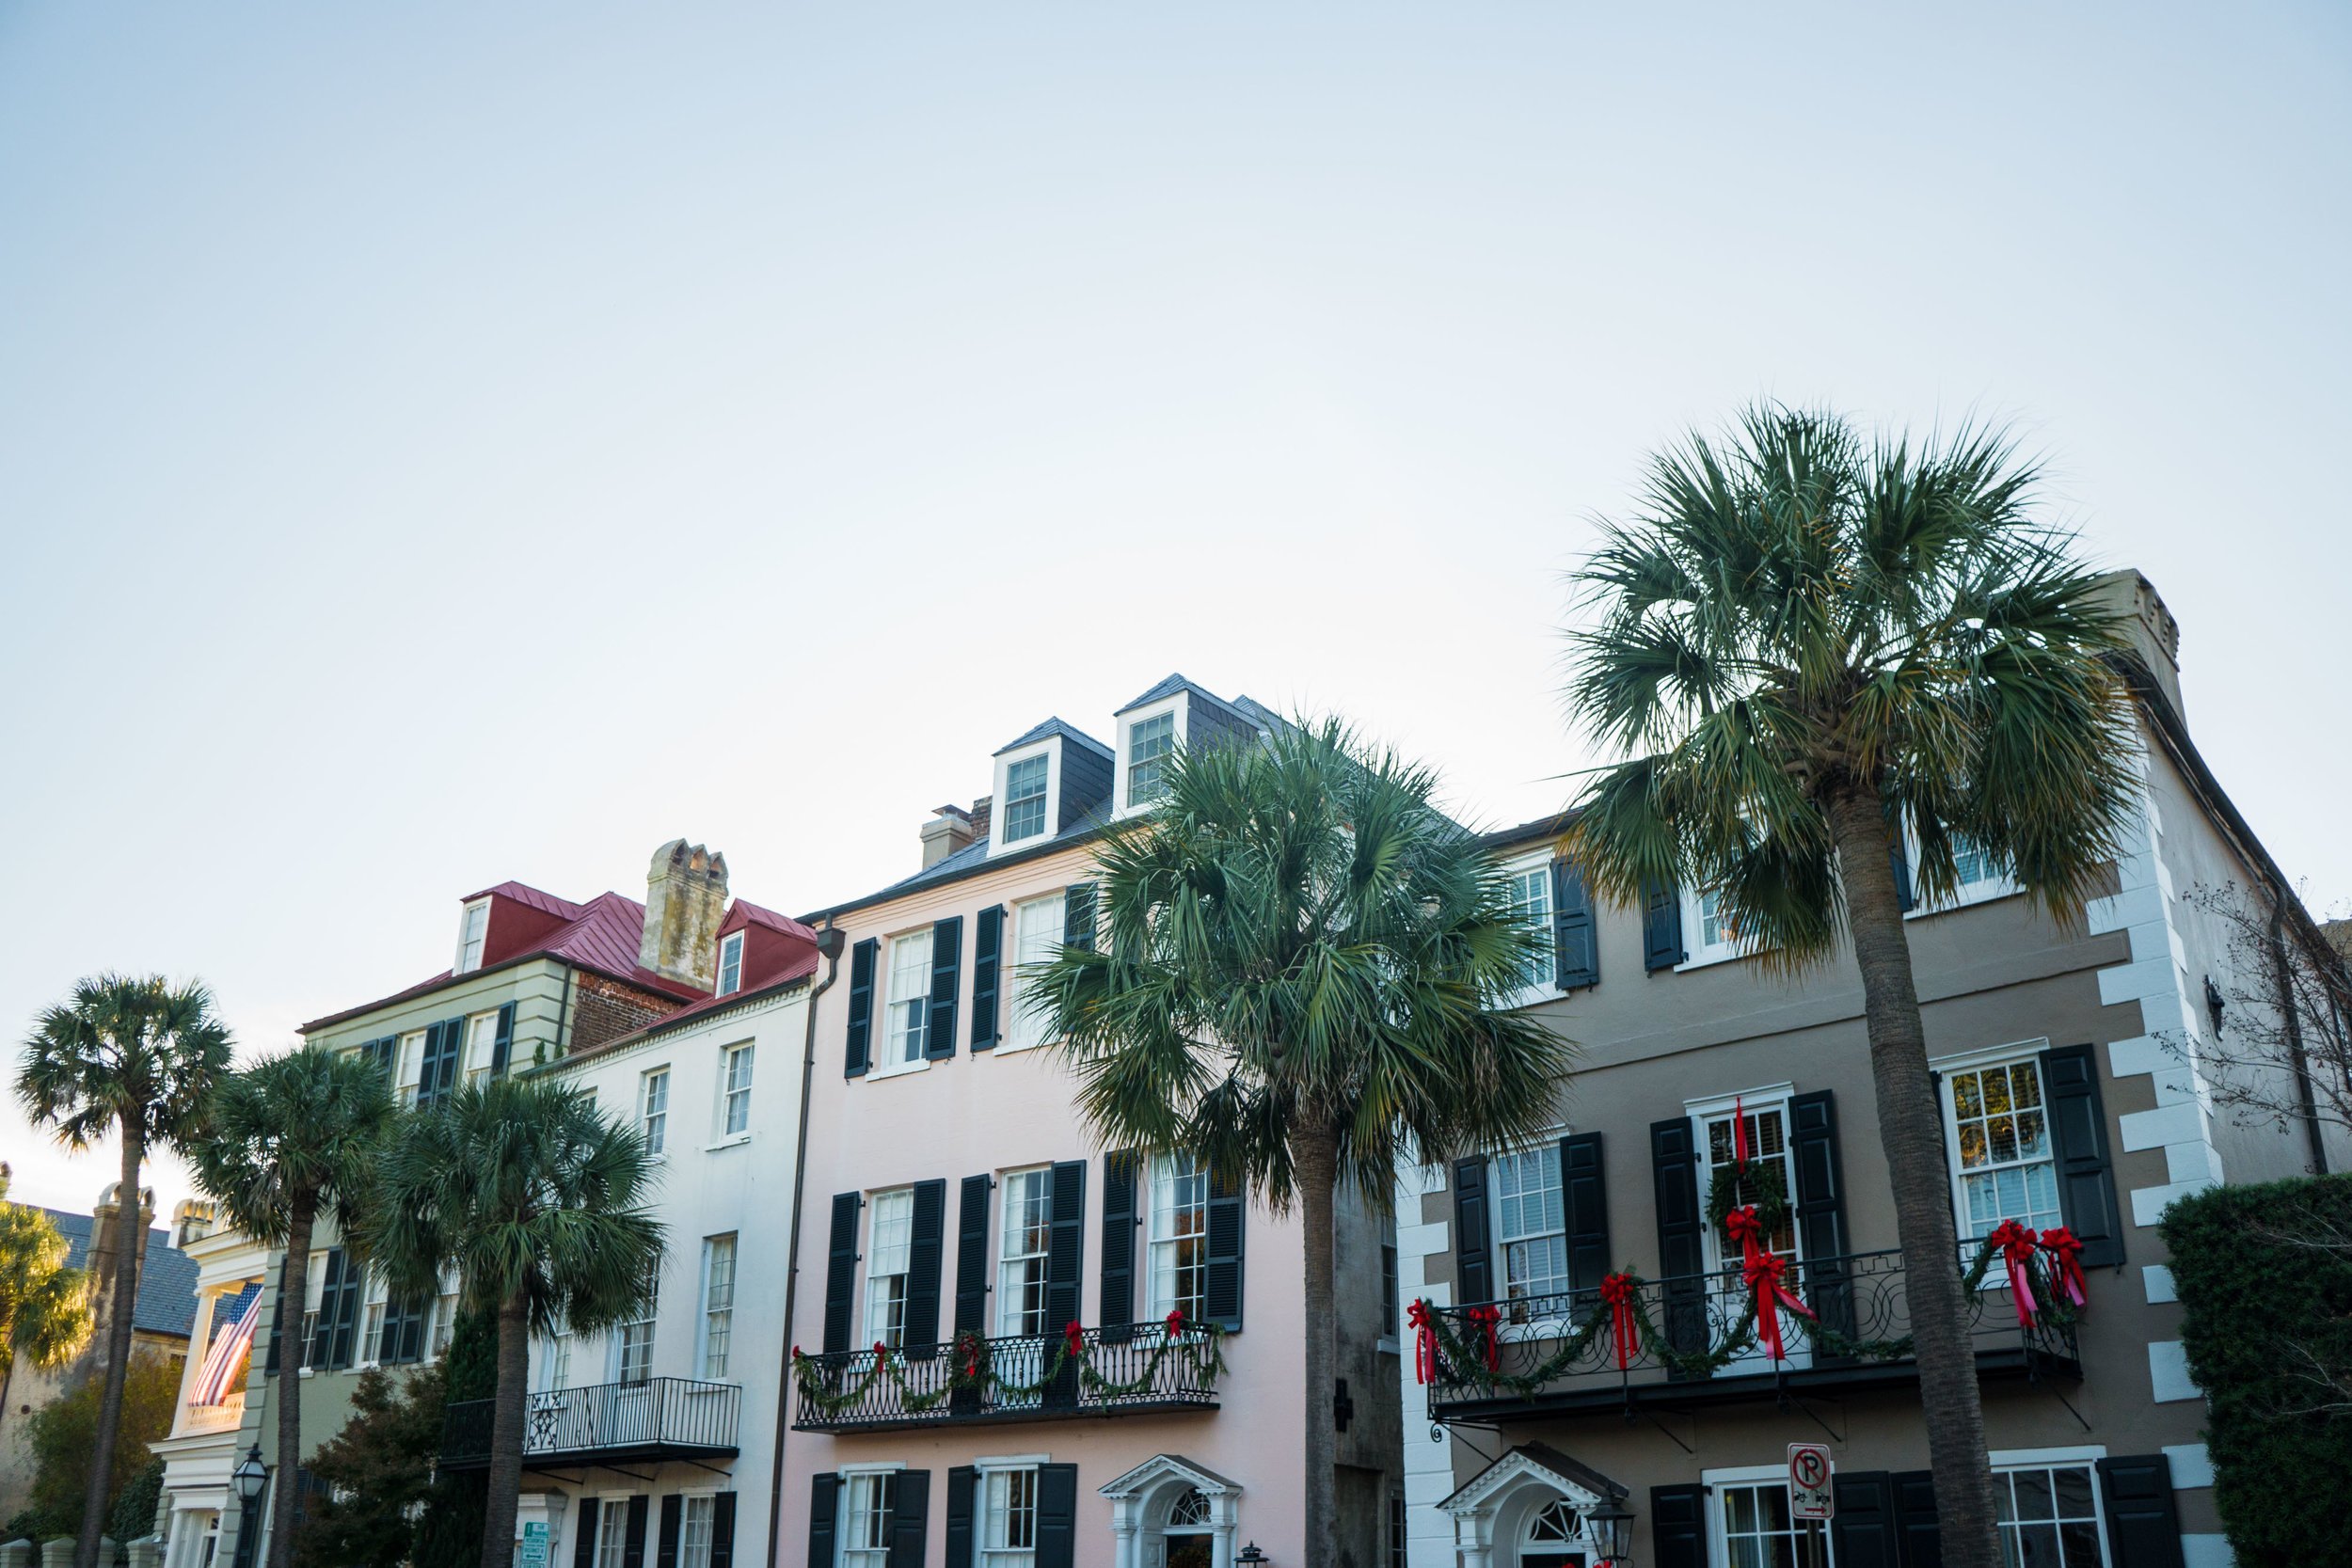  More adorable houses in Charleston  